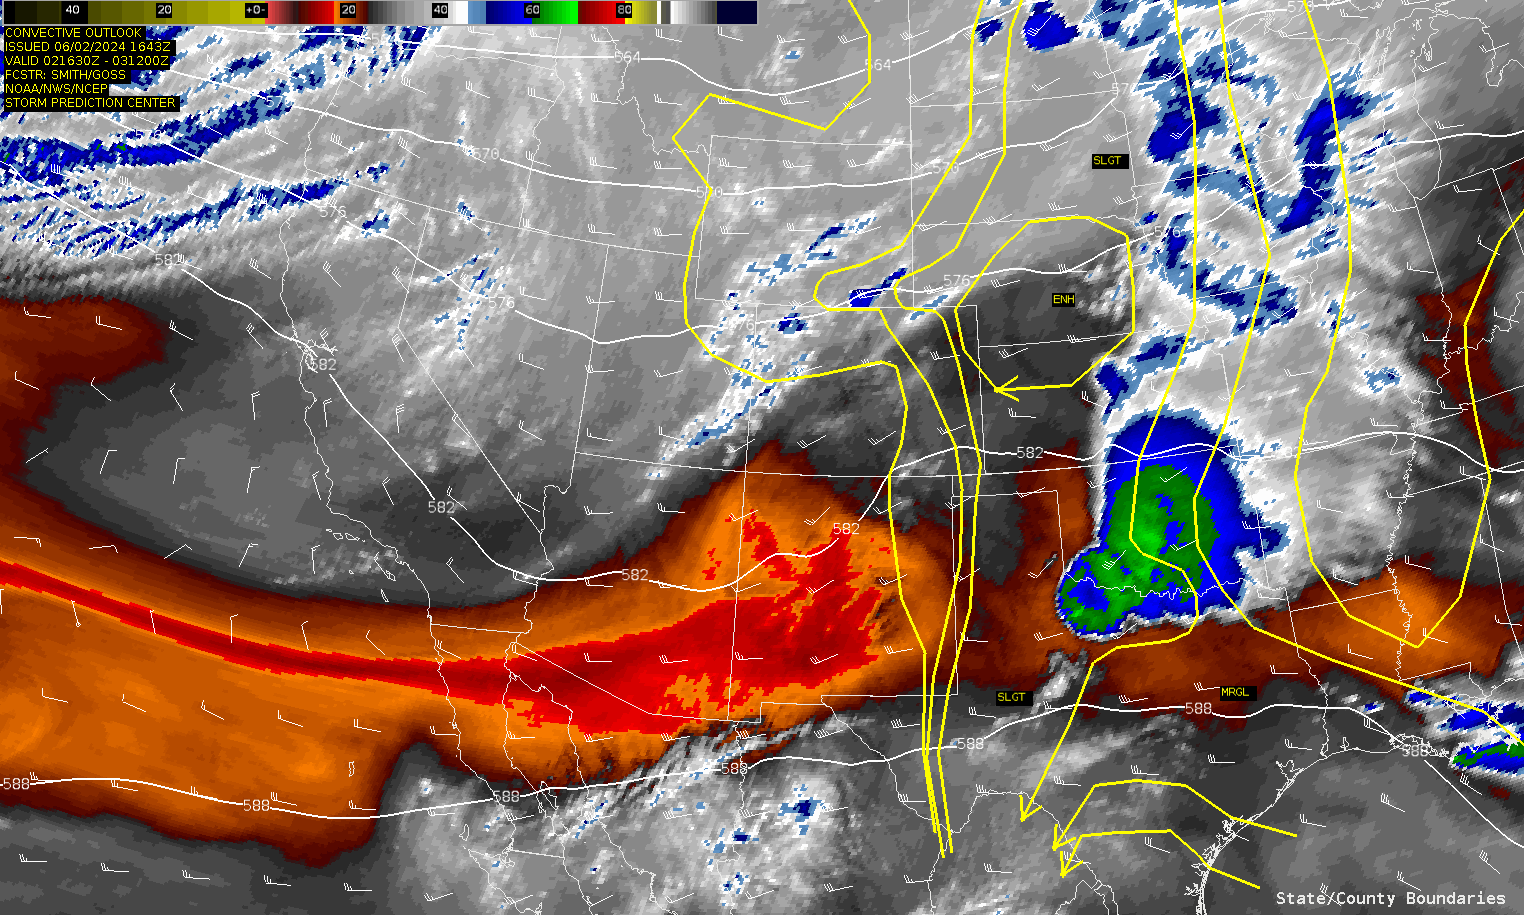 1830Z/1:30 PM CDT Water Vapor image from GOES-W